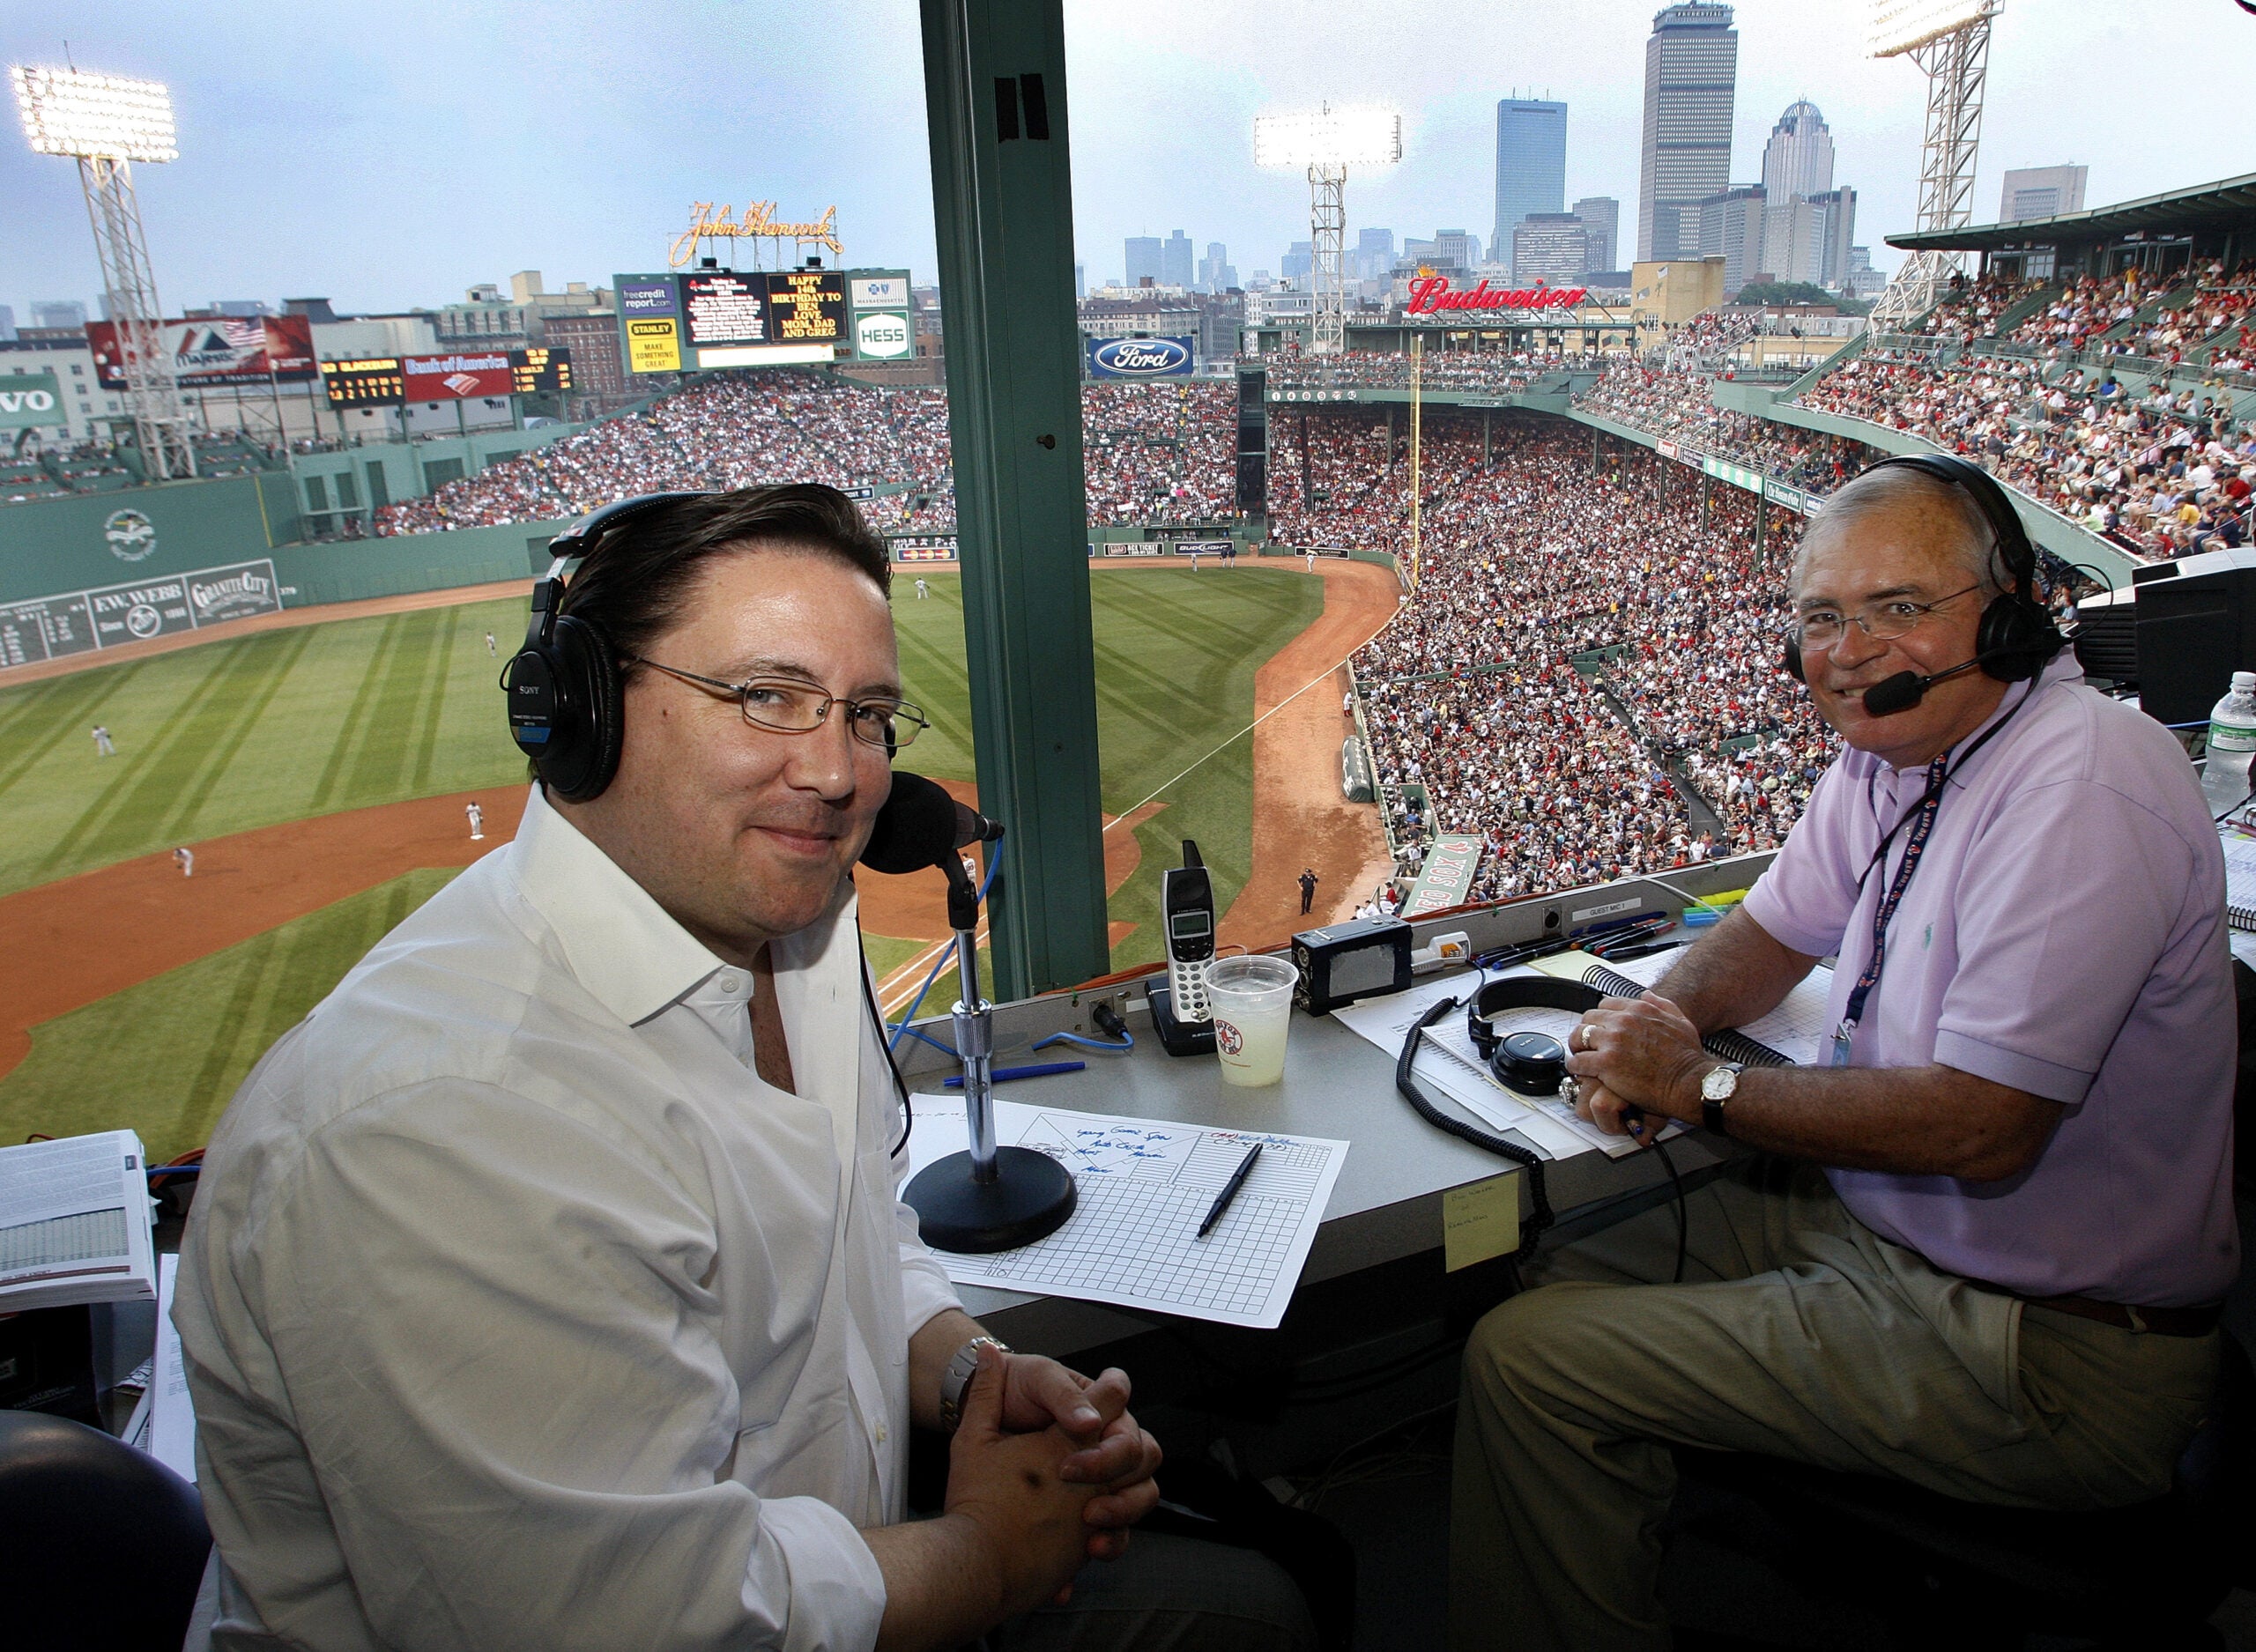 Entercom, WEEI release details on Red Sox broadcast for the 2019 season